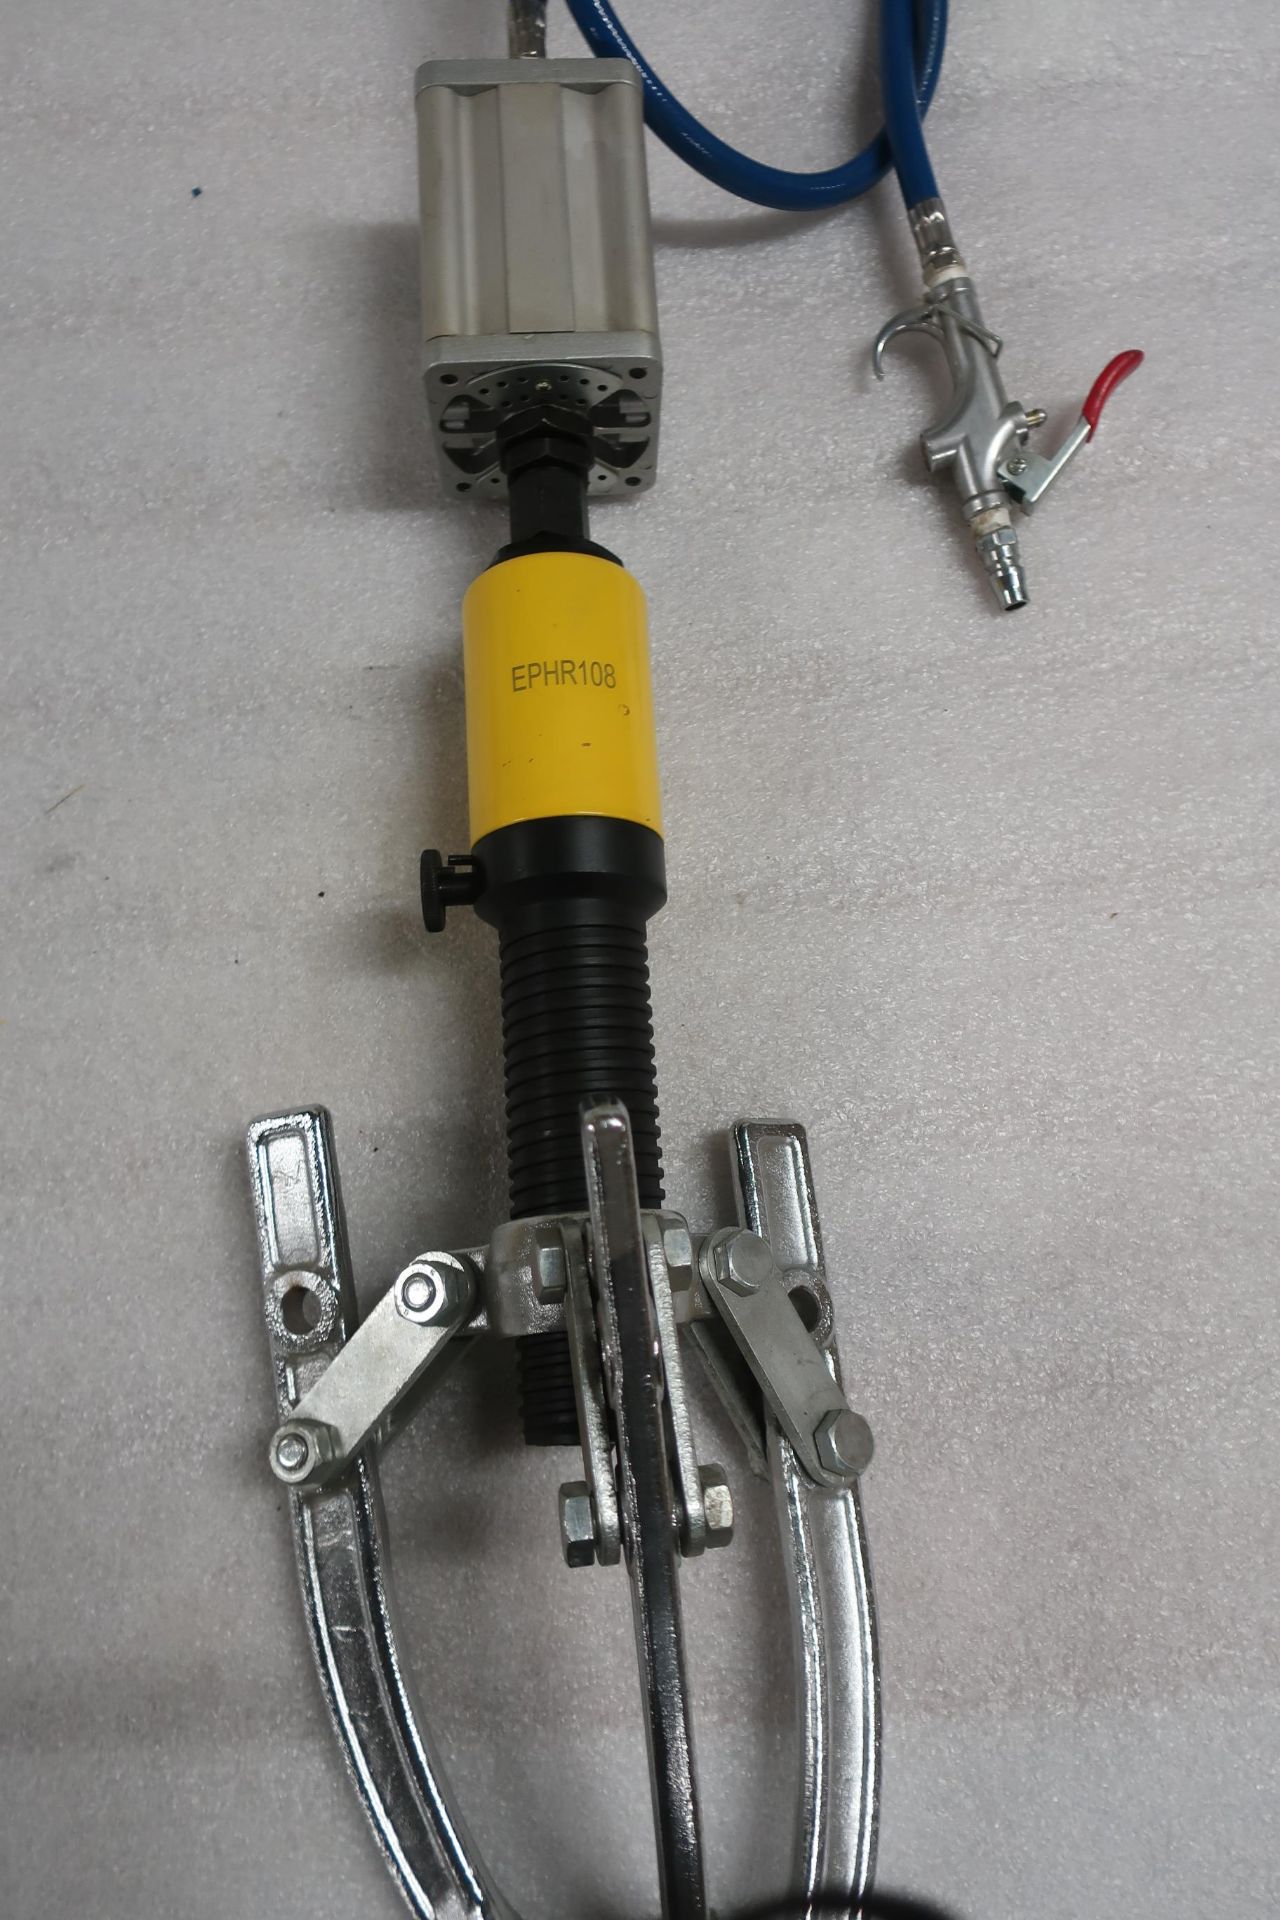 model EPHR108 Pneumatic / Air over Hydraulic Bearing Puller with 5 ton capacity MINT